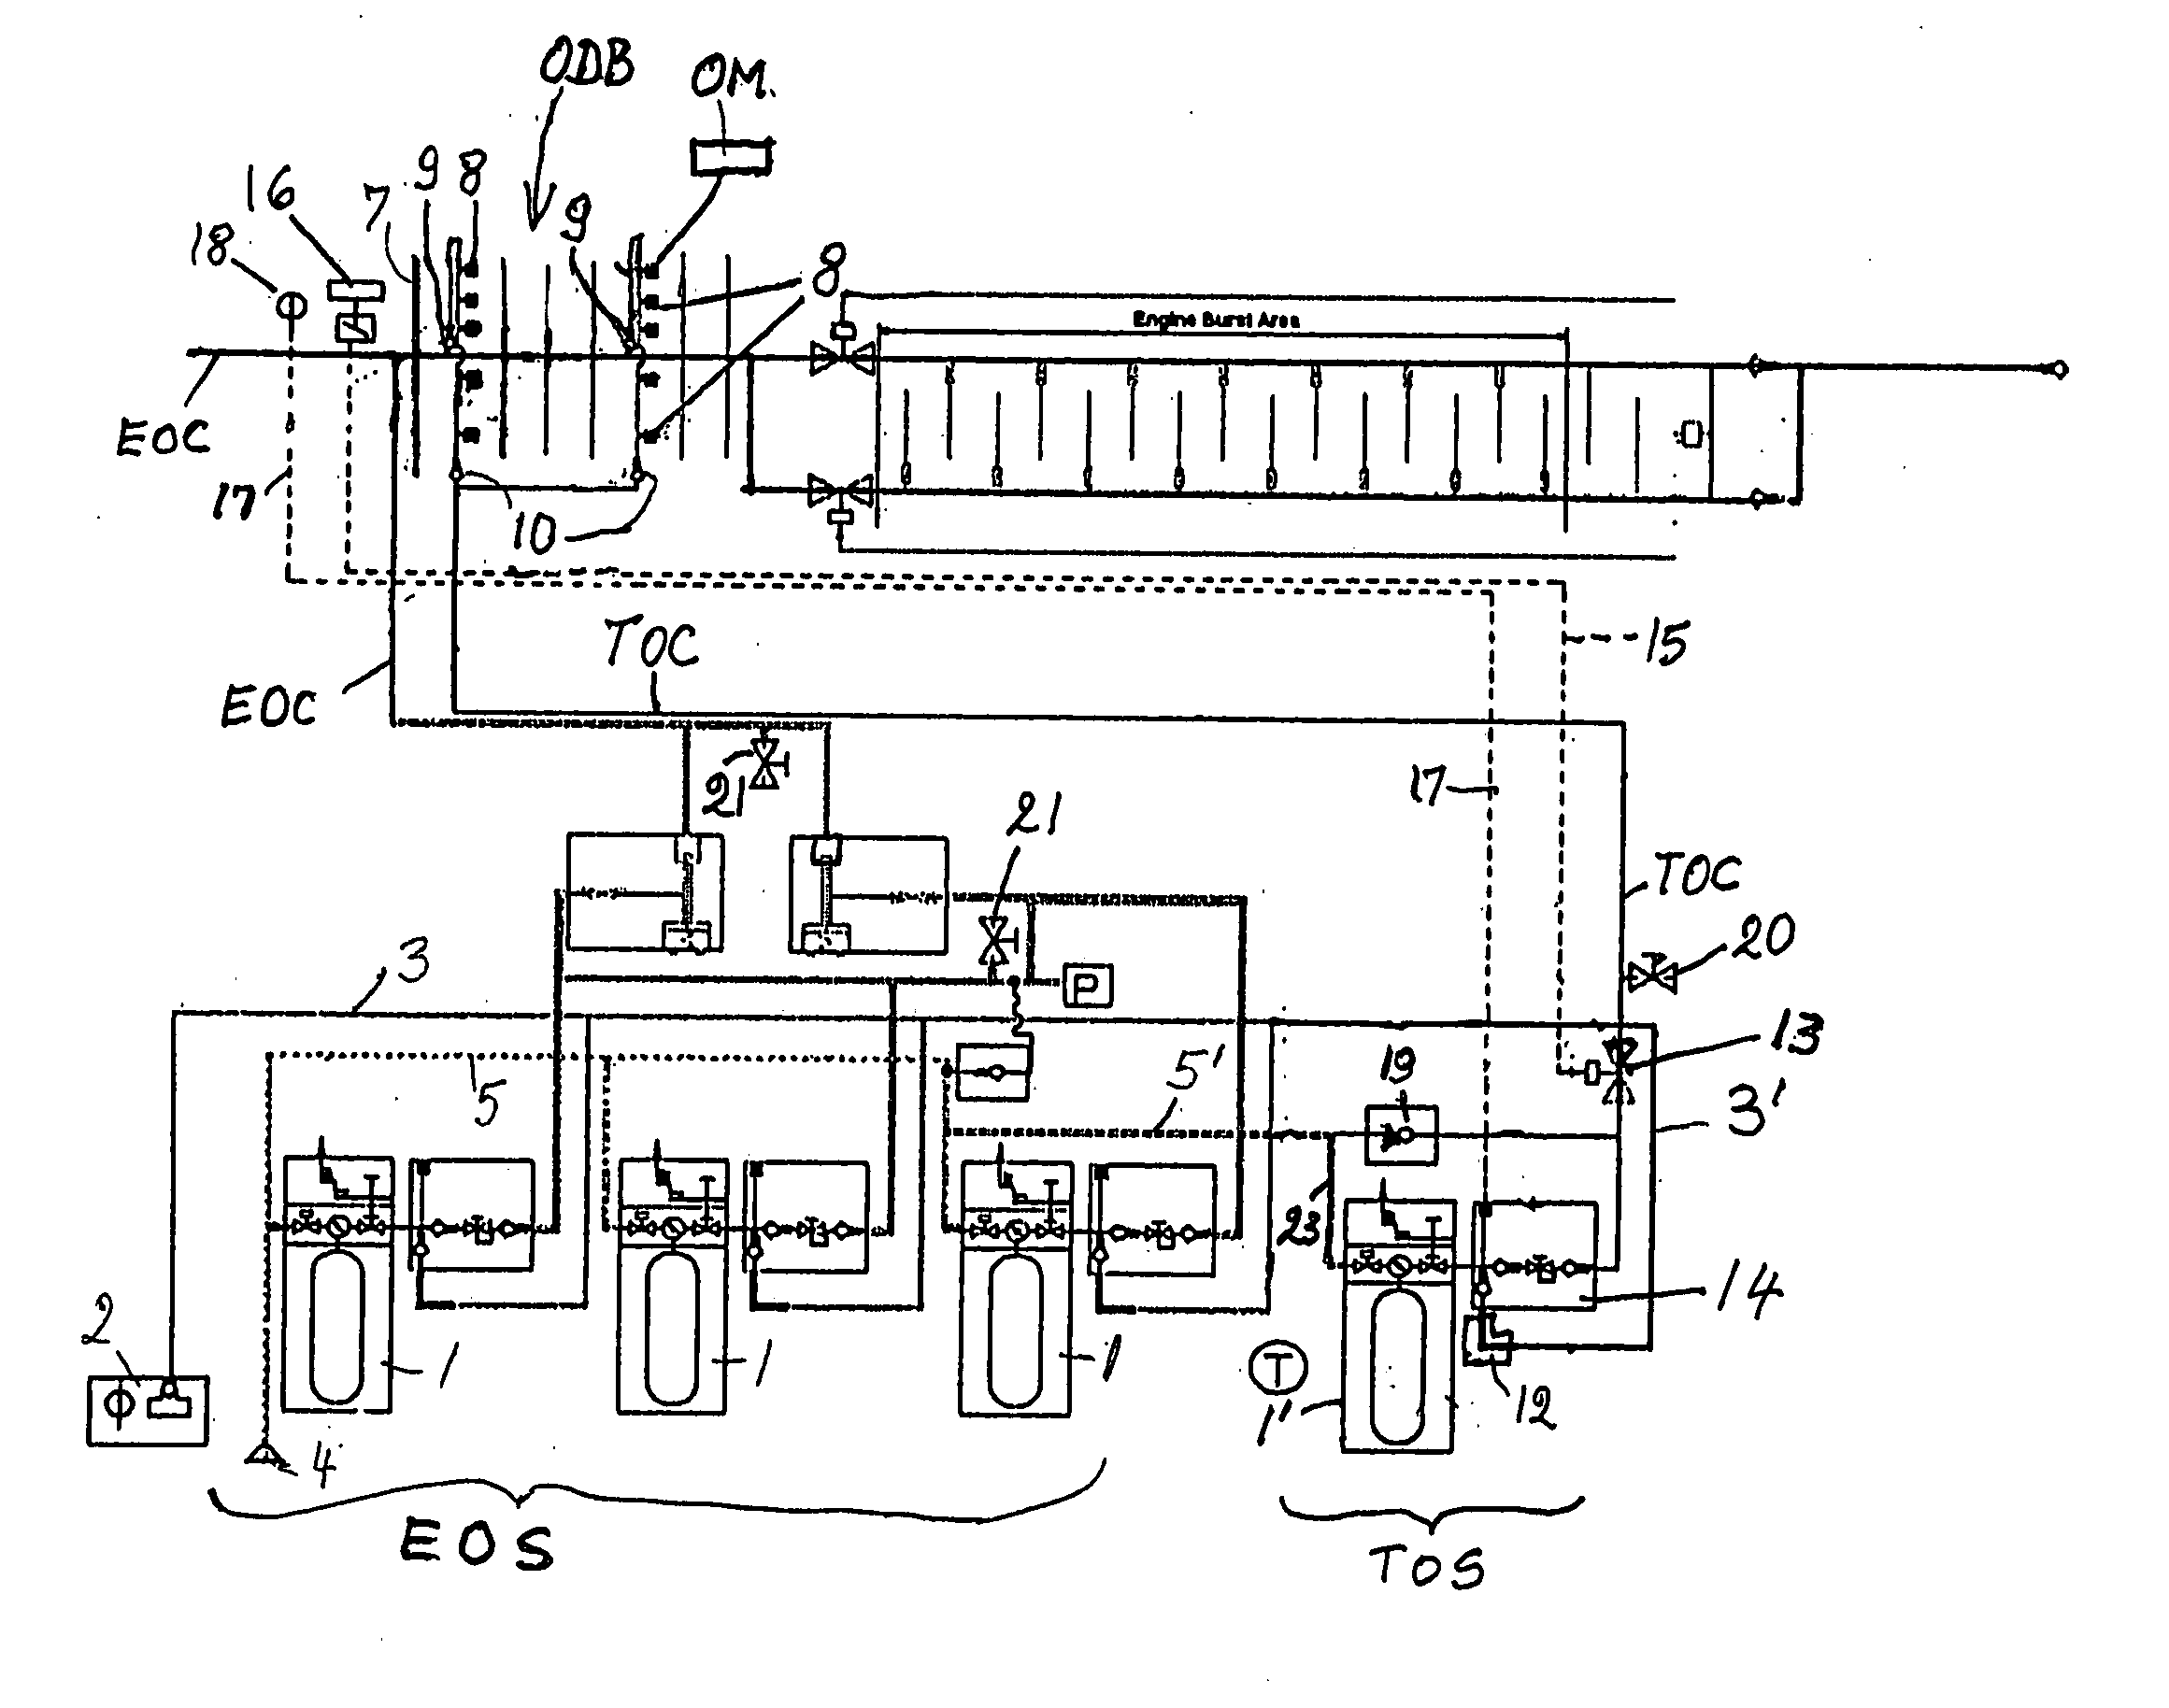 Oxygen supply and distribution system for a passenger aircraft